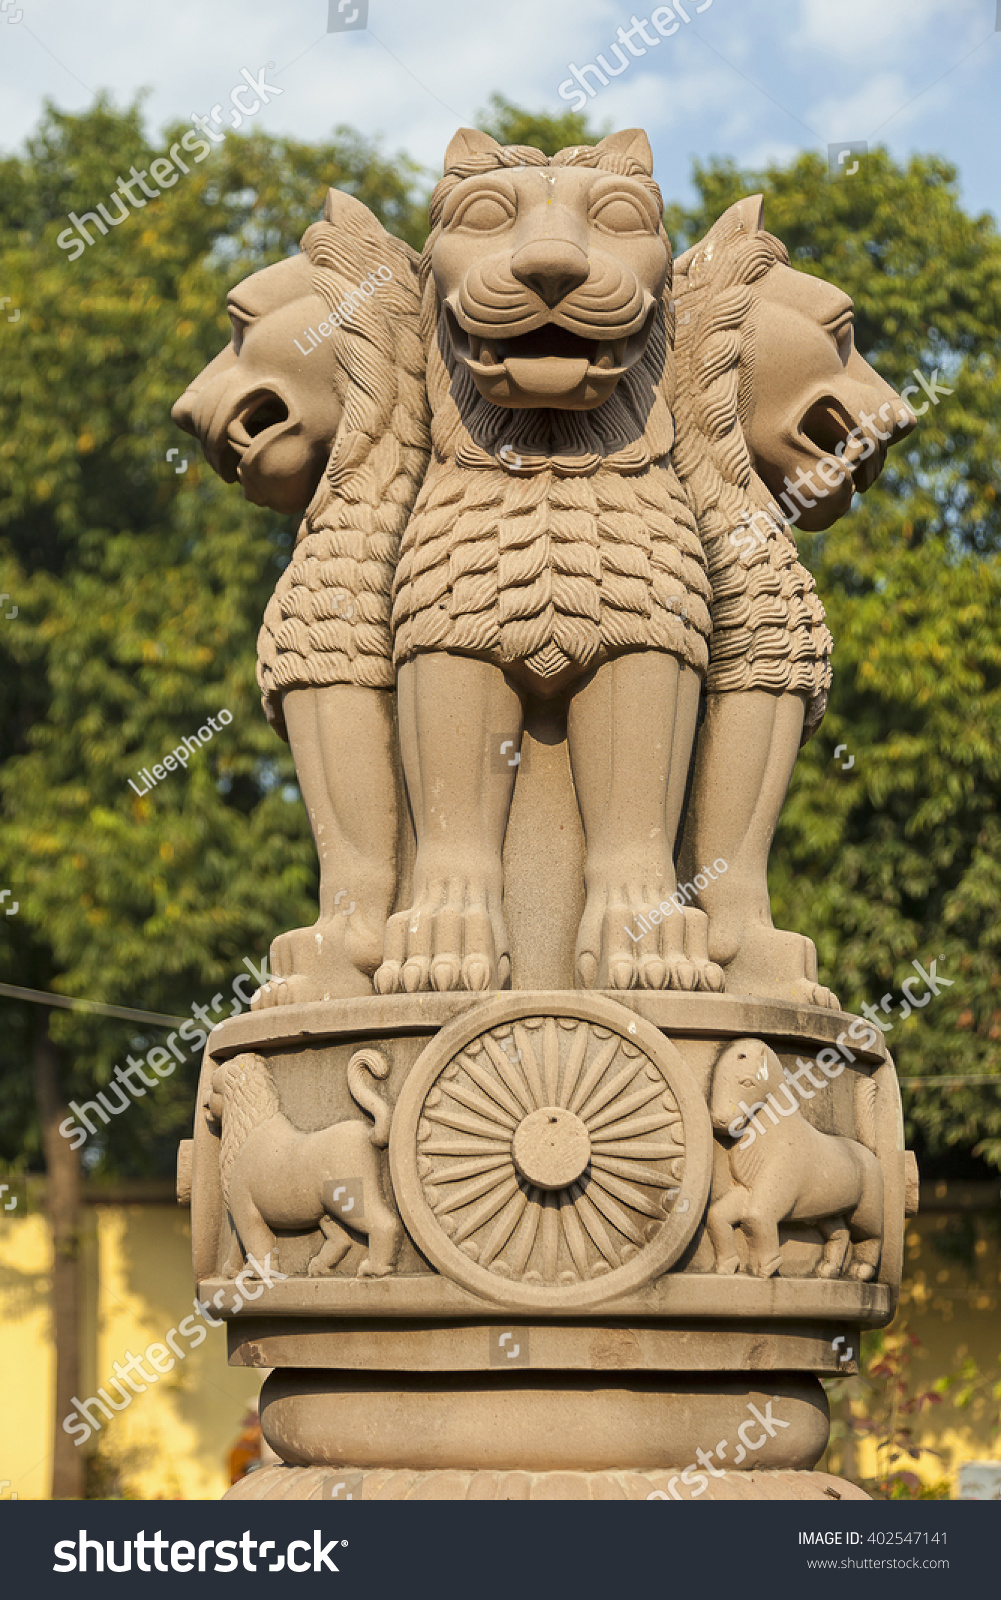 sculpture of emblem of India, four lion symbolizing power, courage, pride and confidence - rest on a circular abacus, India #402547141